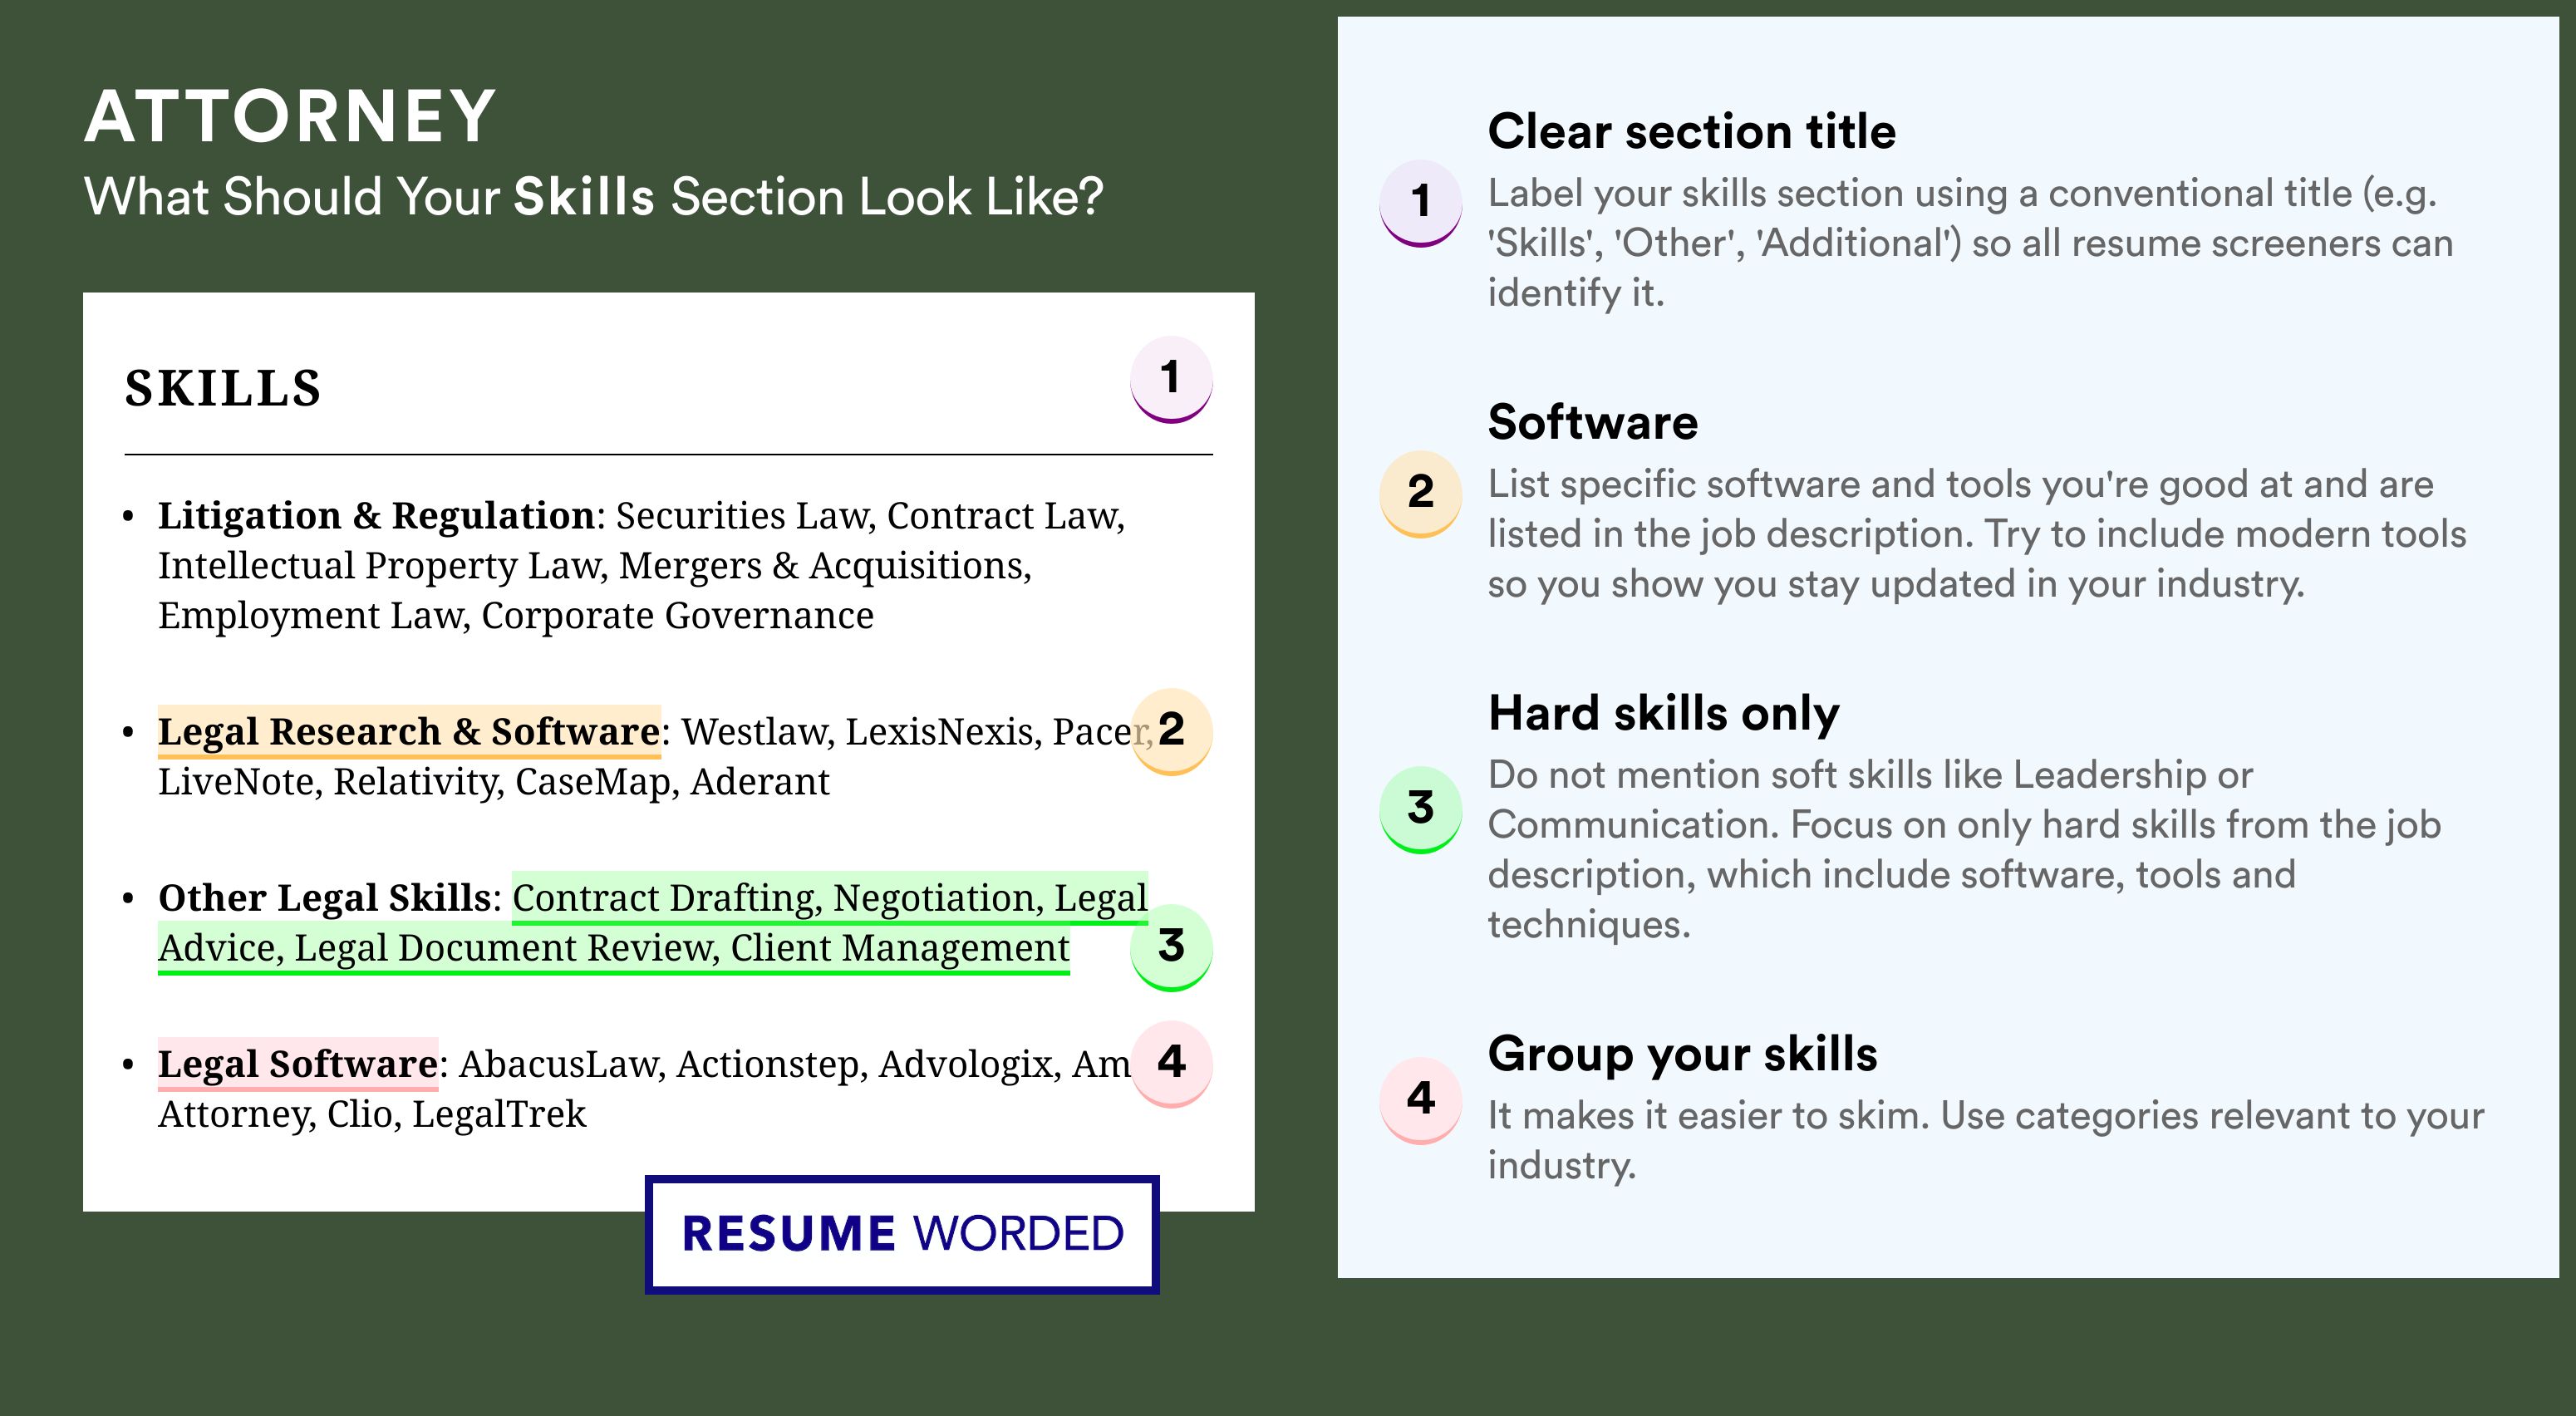 How To Write Your Skills Section - Attorney Roles